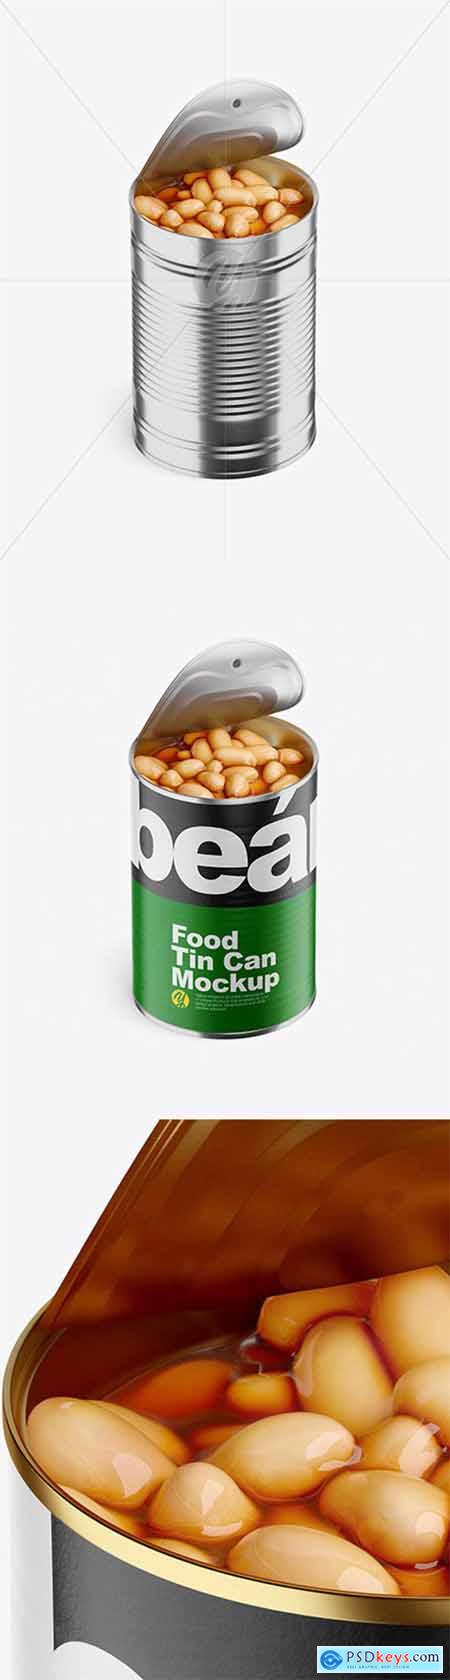 Food Can w- White Beans Mockup 36420